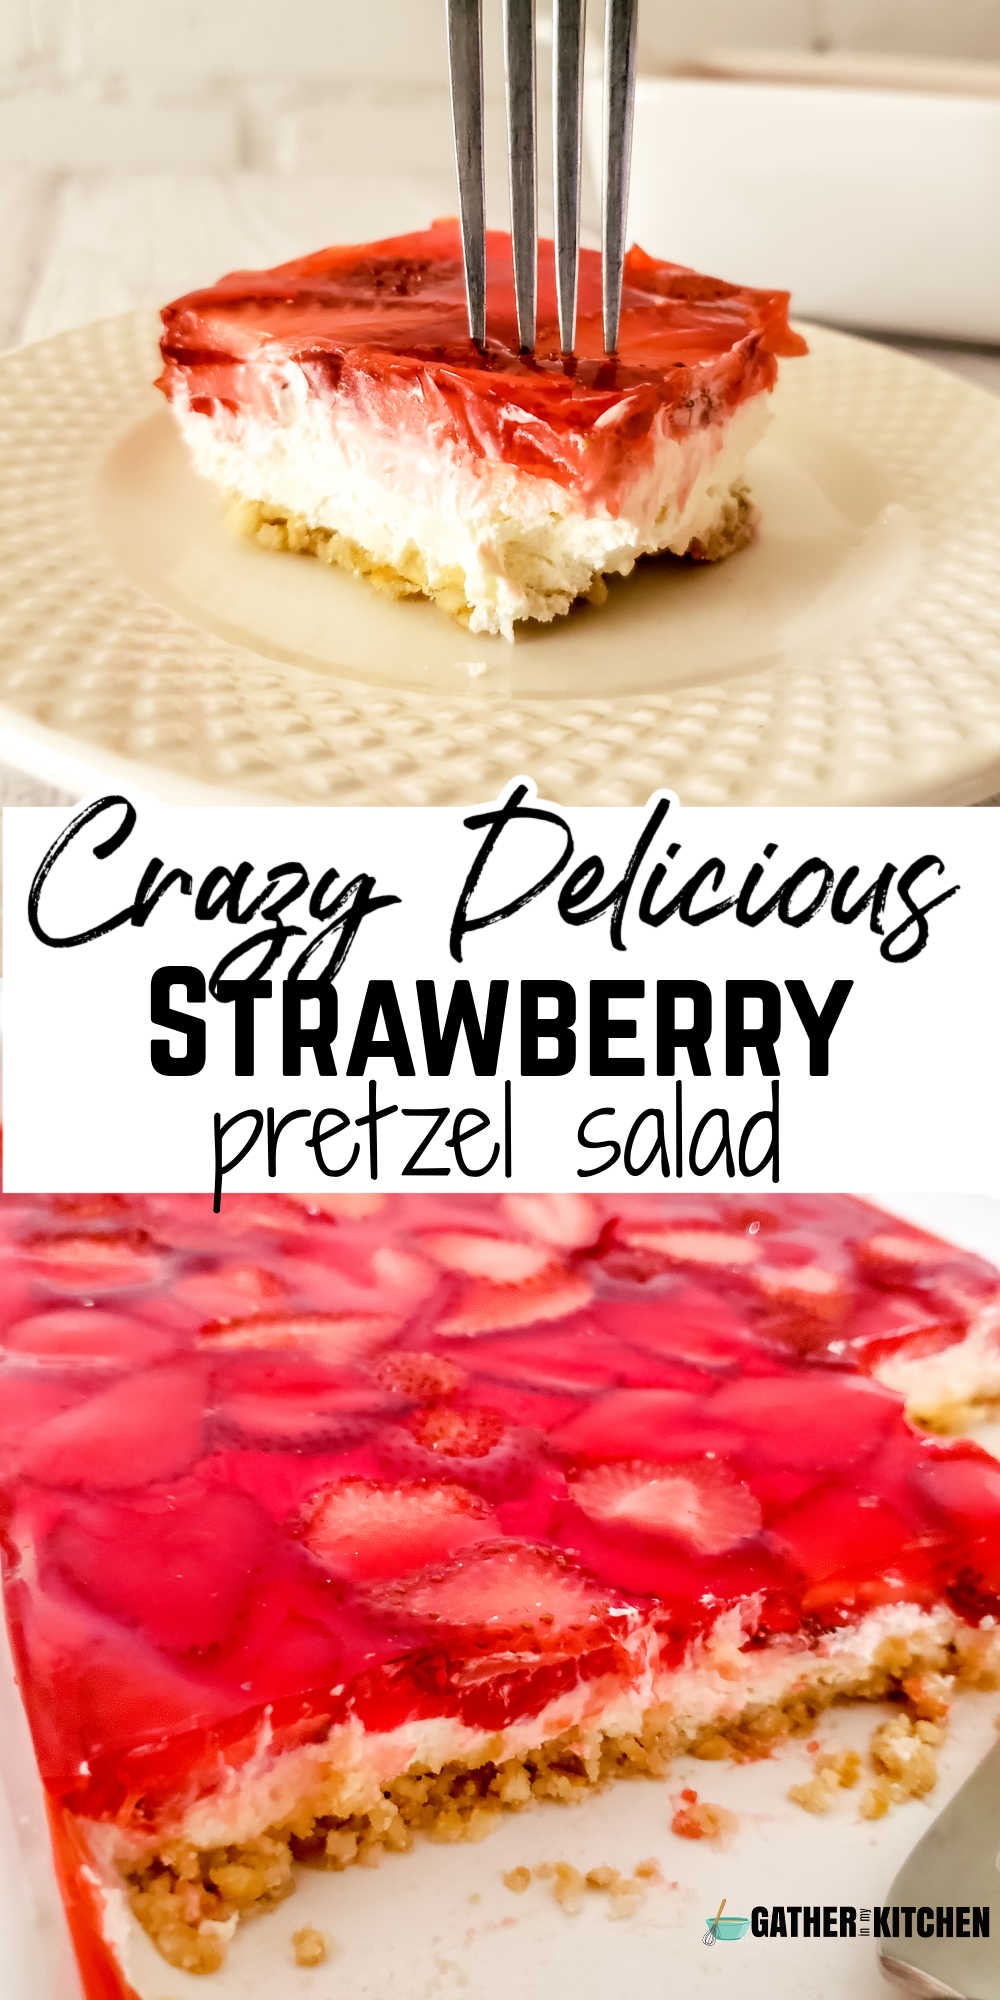 Pin image: top has a slice of strawberry pretzel salad on a plate with a fork piercing it, middle says "Crazy delicious strawberry pretzel salad" and bottom shows the layers of strawberry pretzels salad in a casserole dish missing a row.